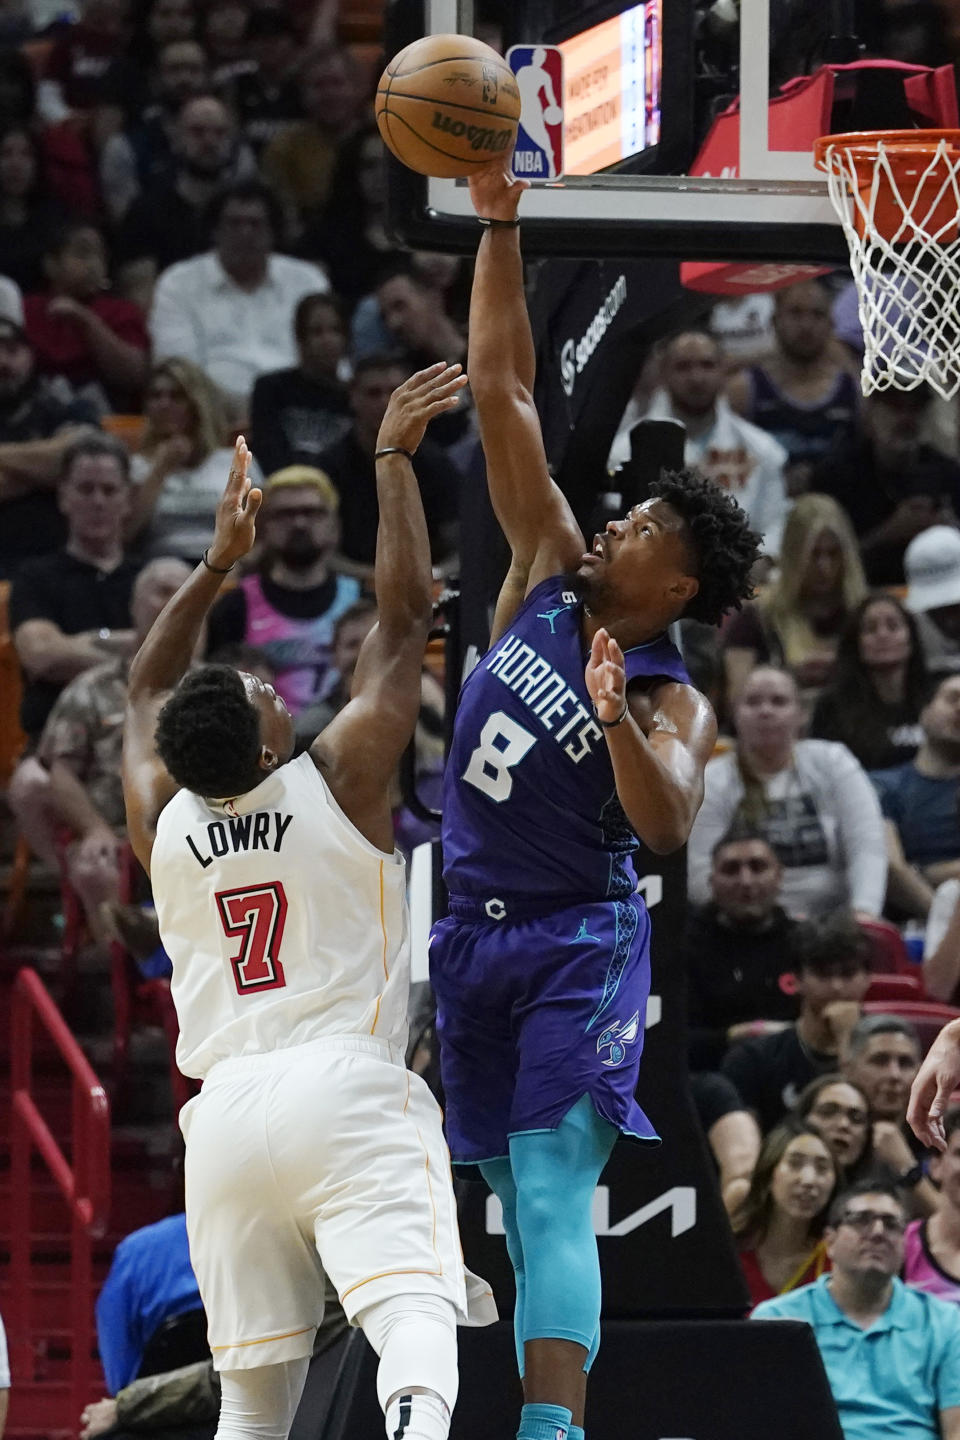 Charlotte Hornets guard Dennis Smith Jr. (8) blocks a shot to the basket by Miami Heat guard Kyle Lowry (7) during the first half of an NBA basketball game Thursday, Nov. 10, 2022, in Miami. (AP Photo/Marta Lavandier)